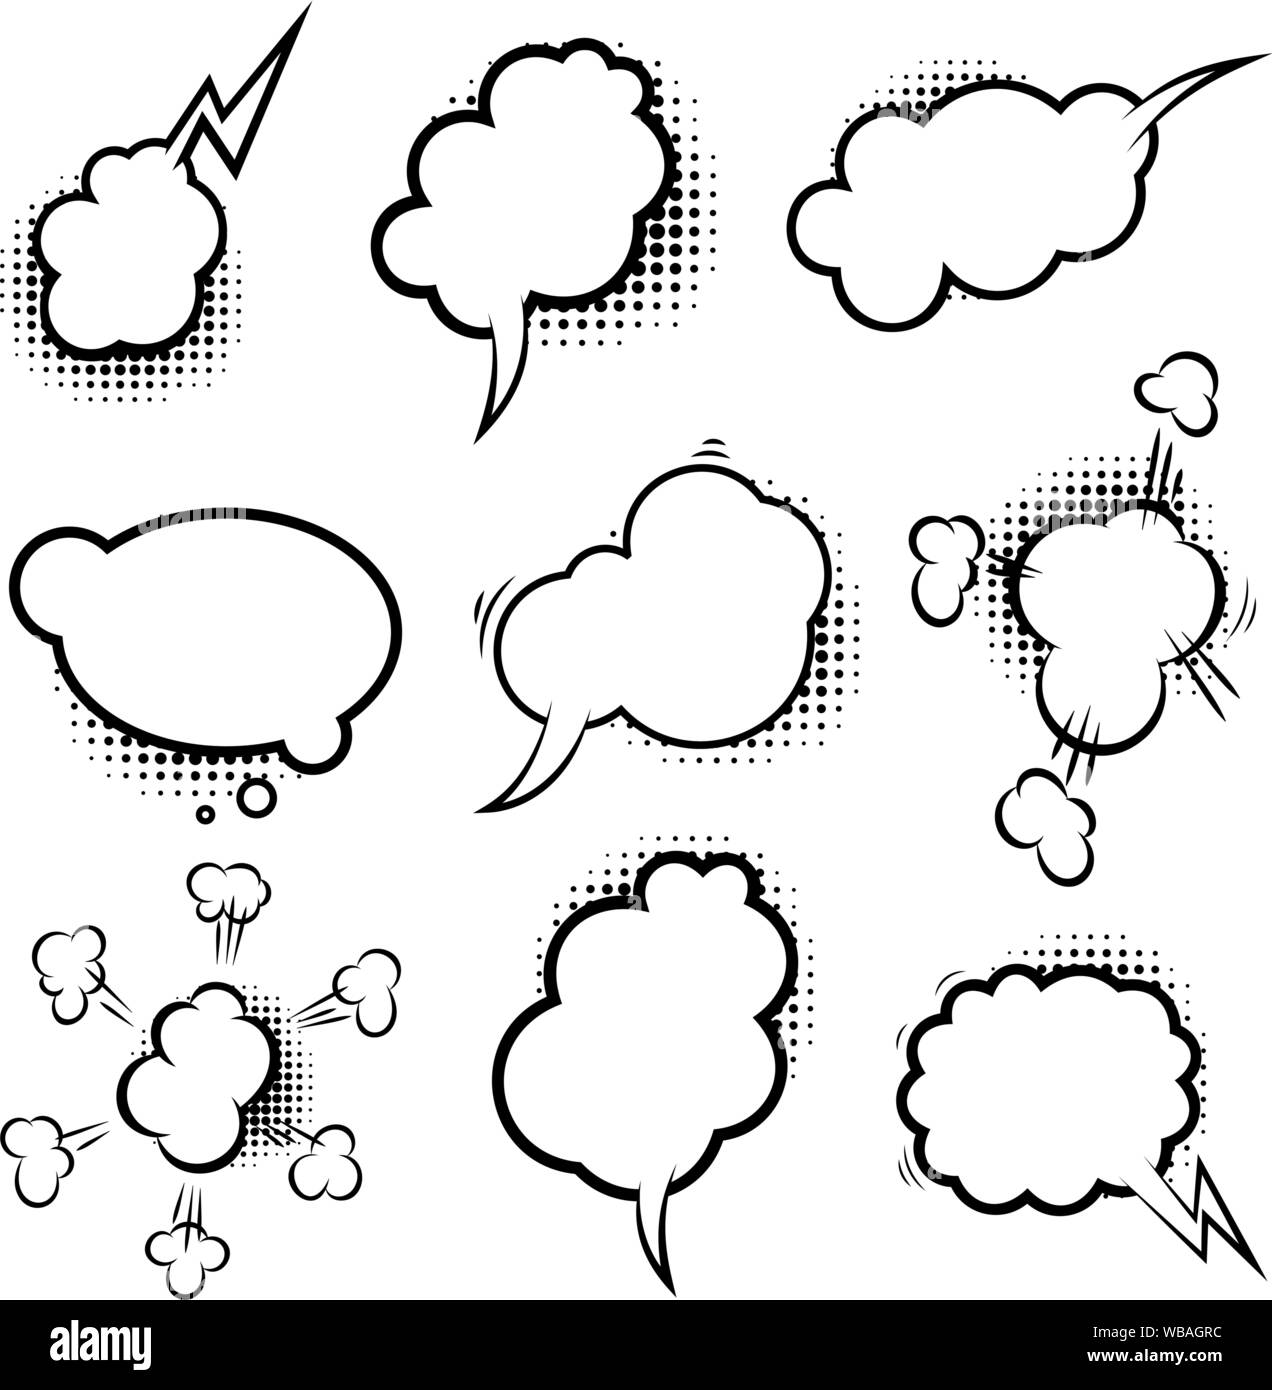 Set of empty comic style speech bubbles with halftone shadows. Design element for poster, emblem, sign, banner, flyer. Vector illustration Stock Vector